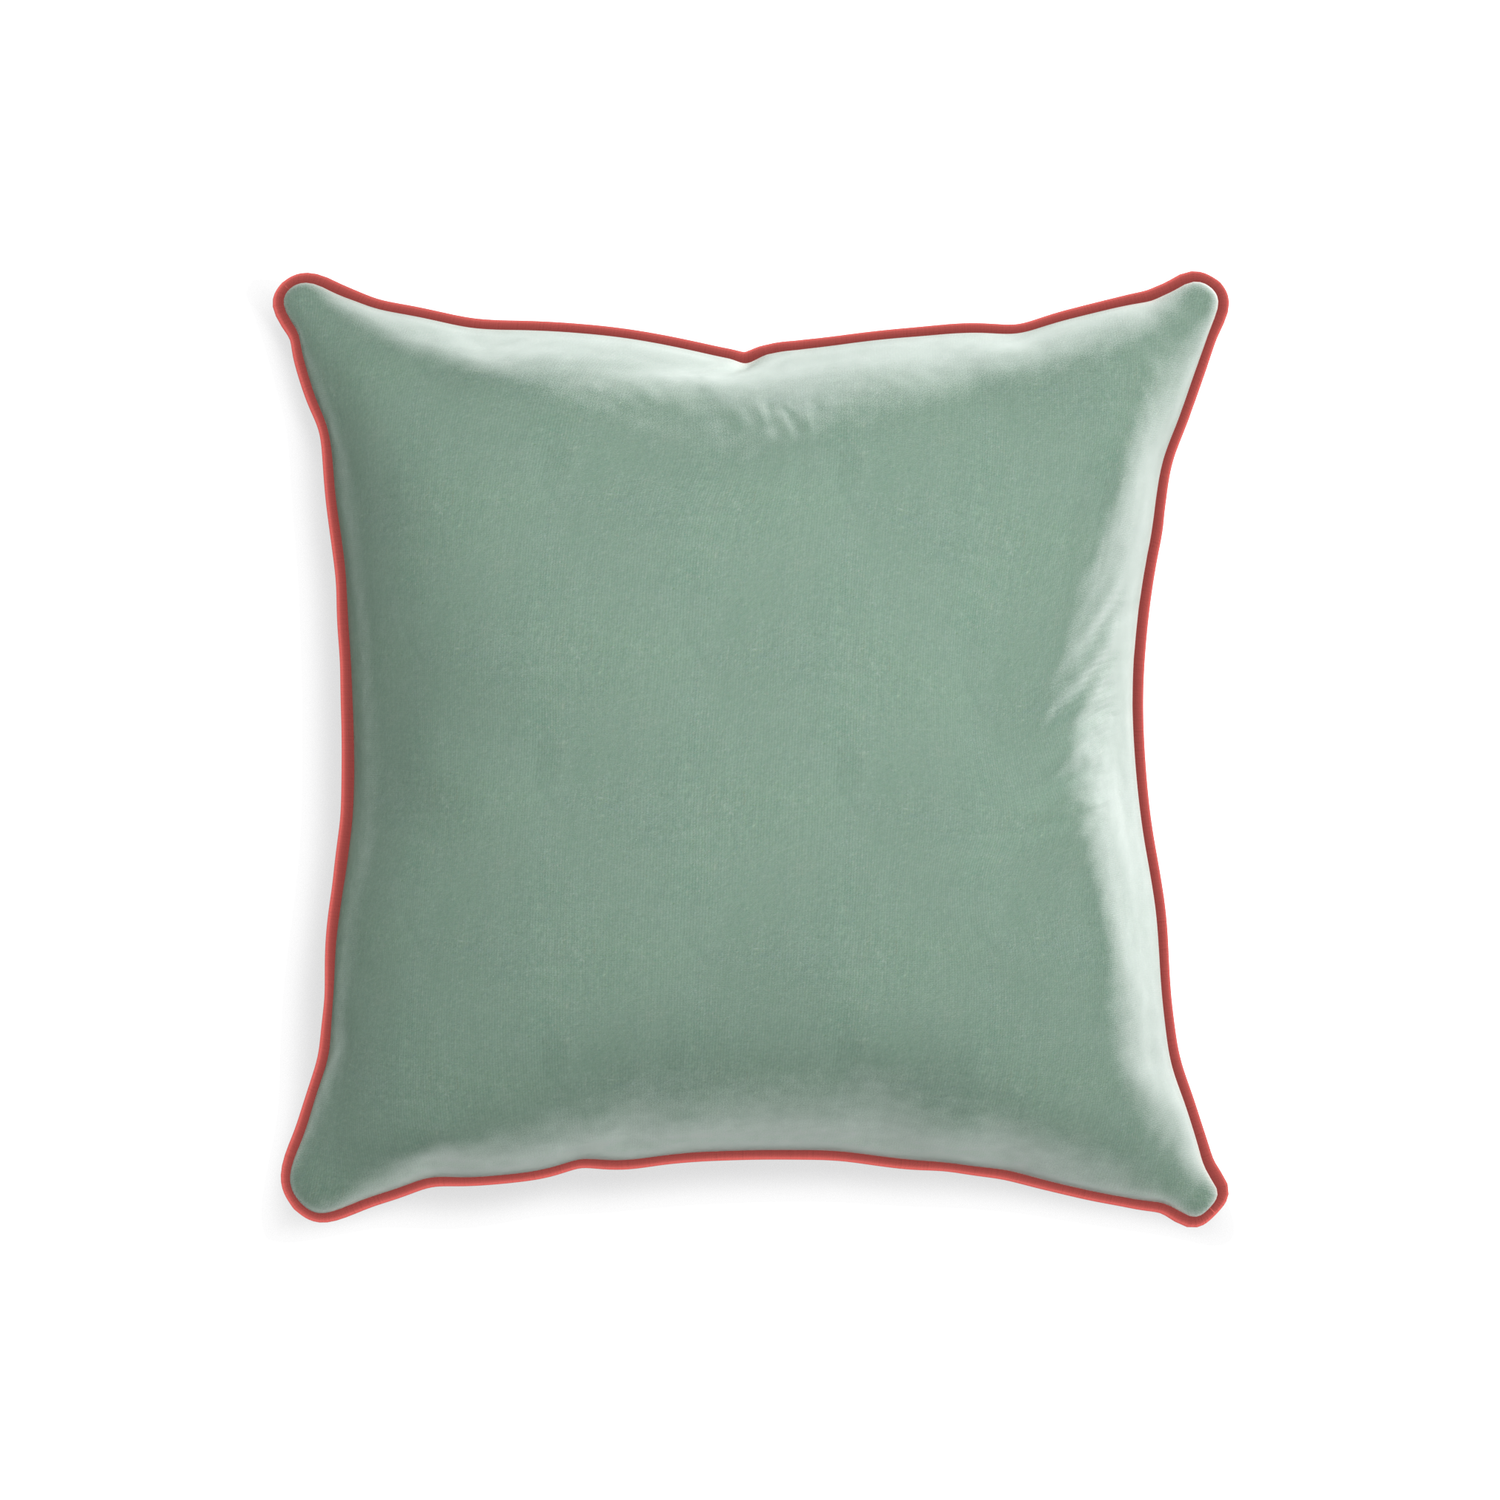 square blue green velvet pillow with coral piping